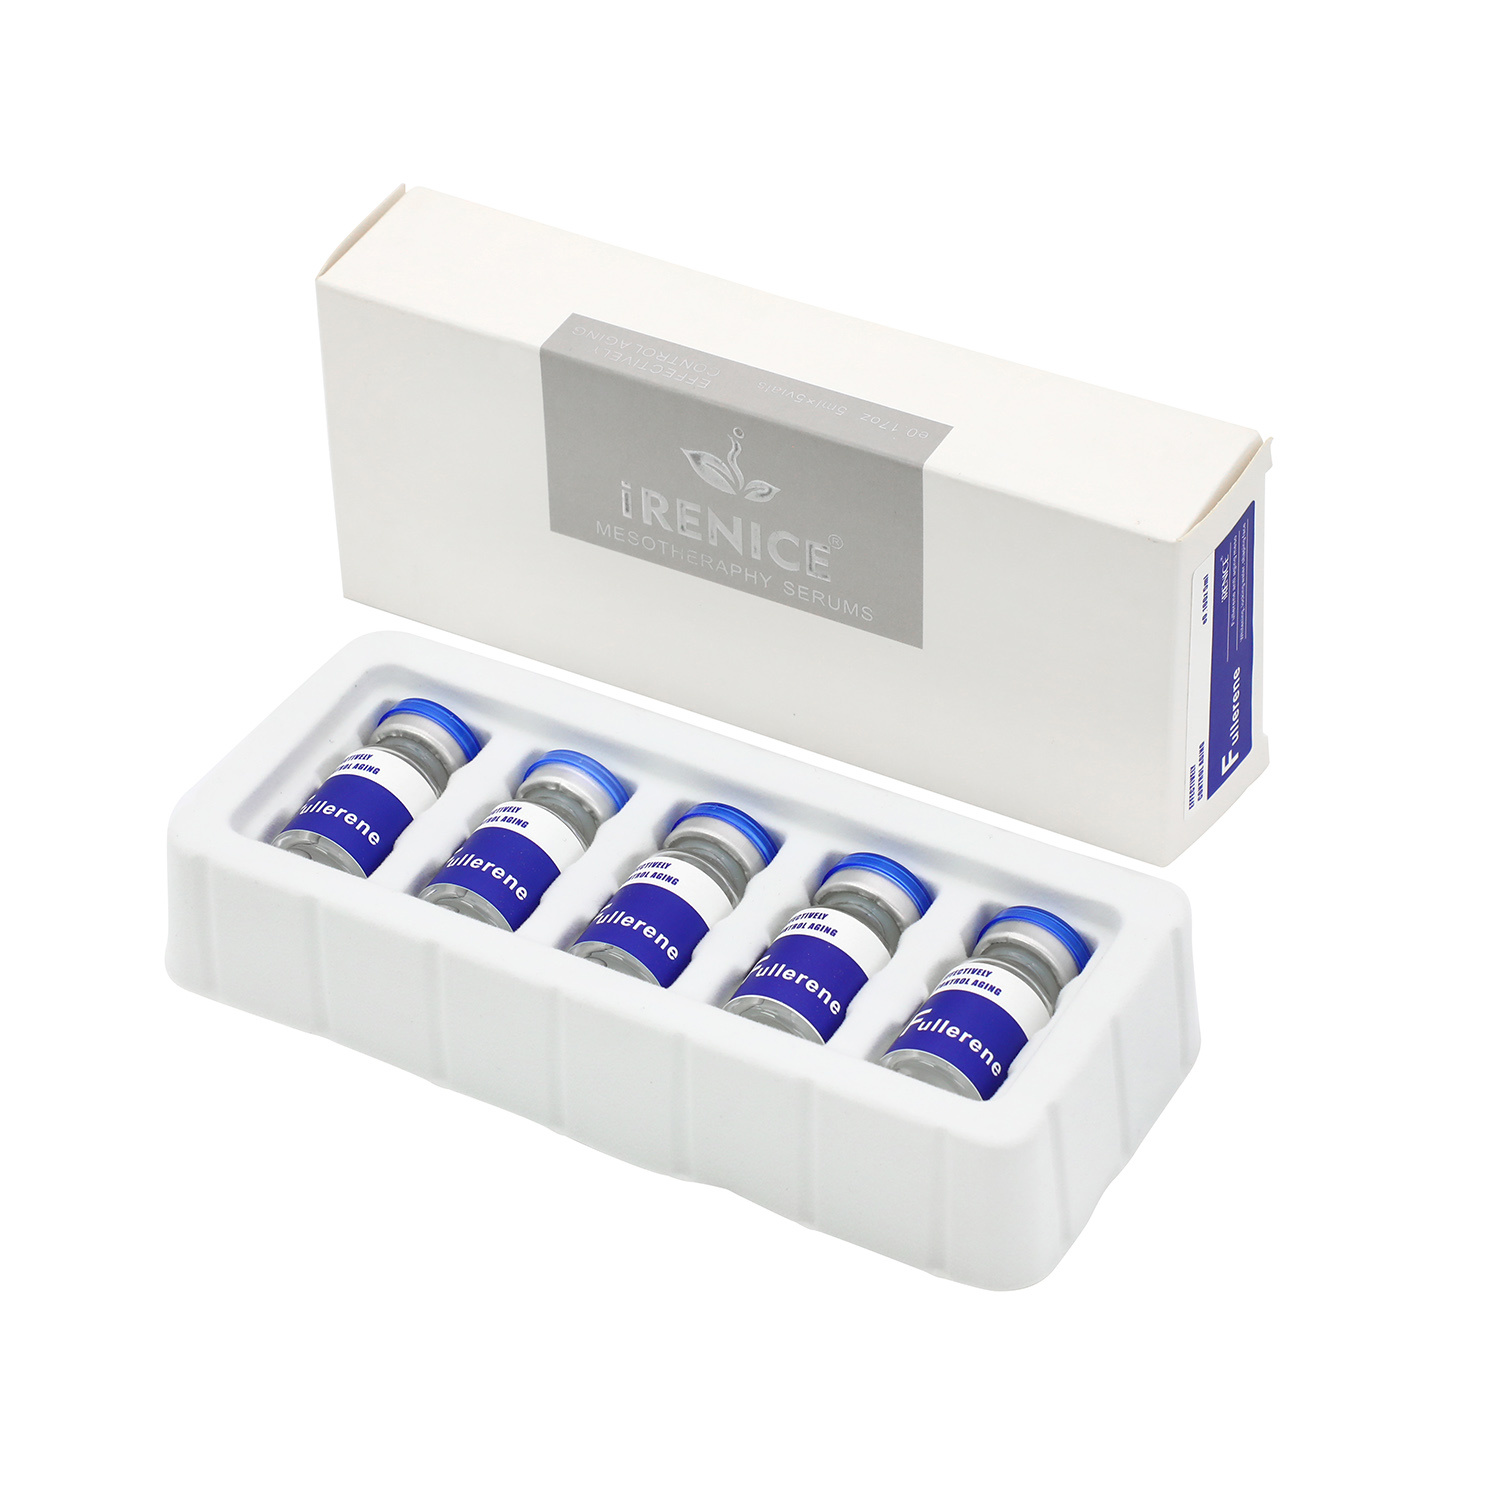 Anti-Aging Skin Booster Filler Meso Solution Injection Hyaluronic Acid Mesoterapia irence Price-iRENICE